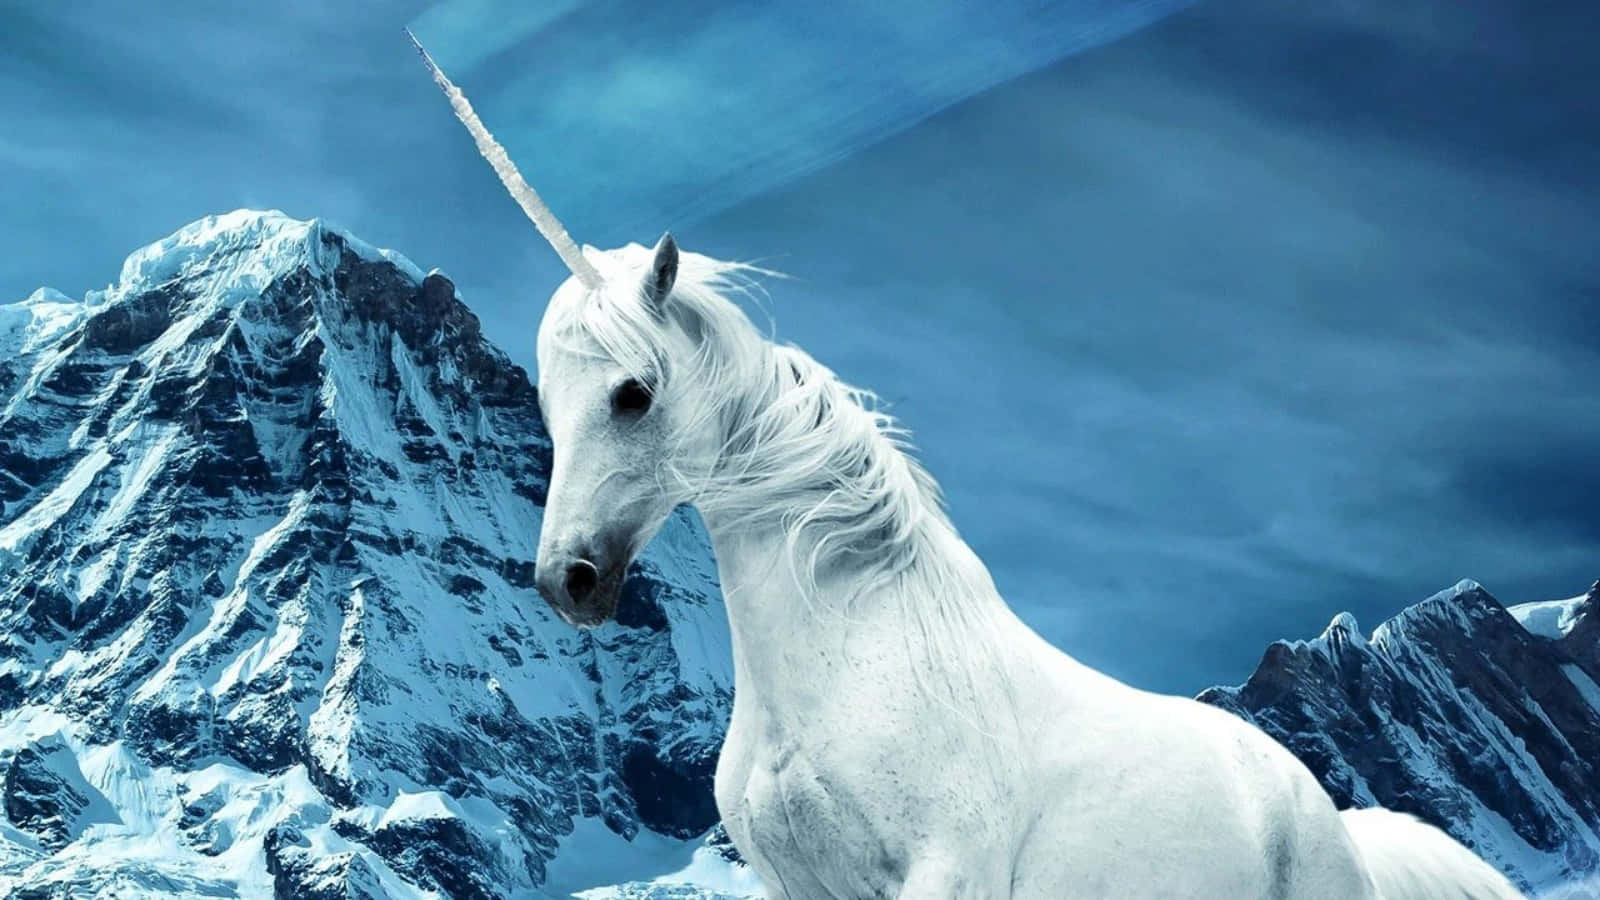 A White Unicorn Standing In Front Of A Mountain